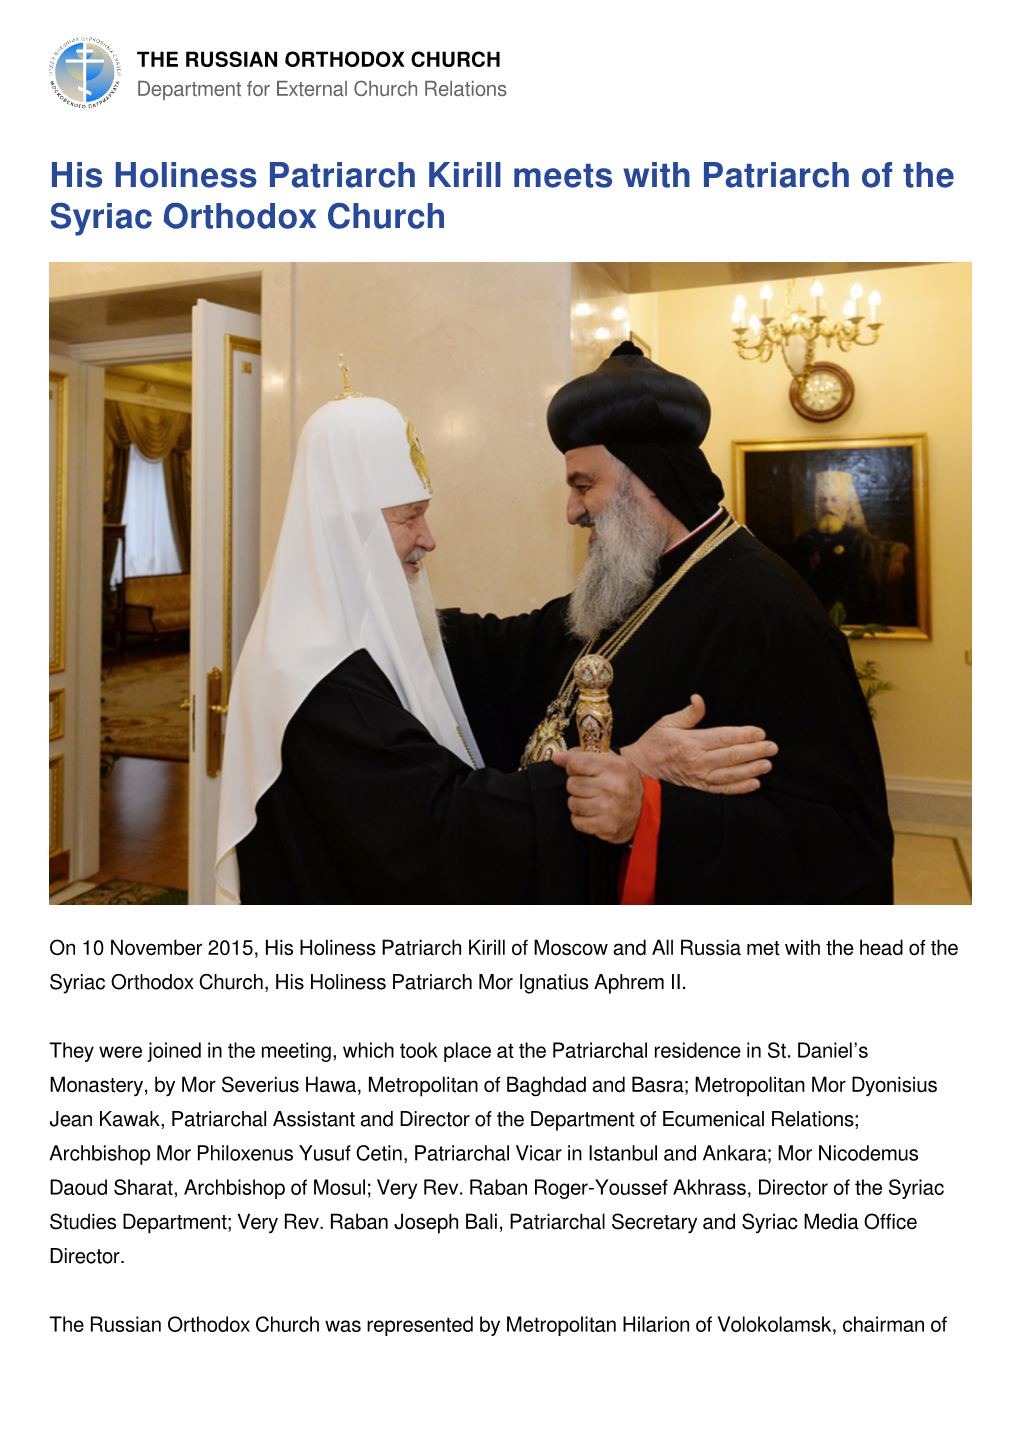 His Holiness Patriarch Kirill Meets with Patriarch of the Syriac Orthodox Church